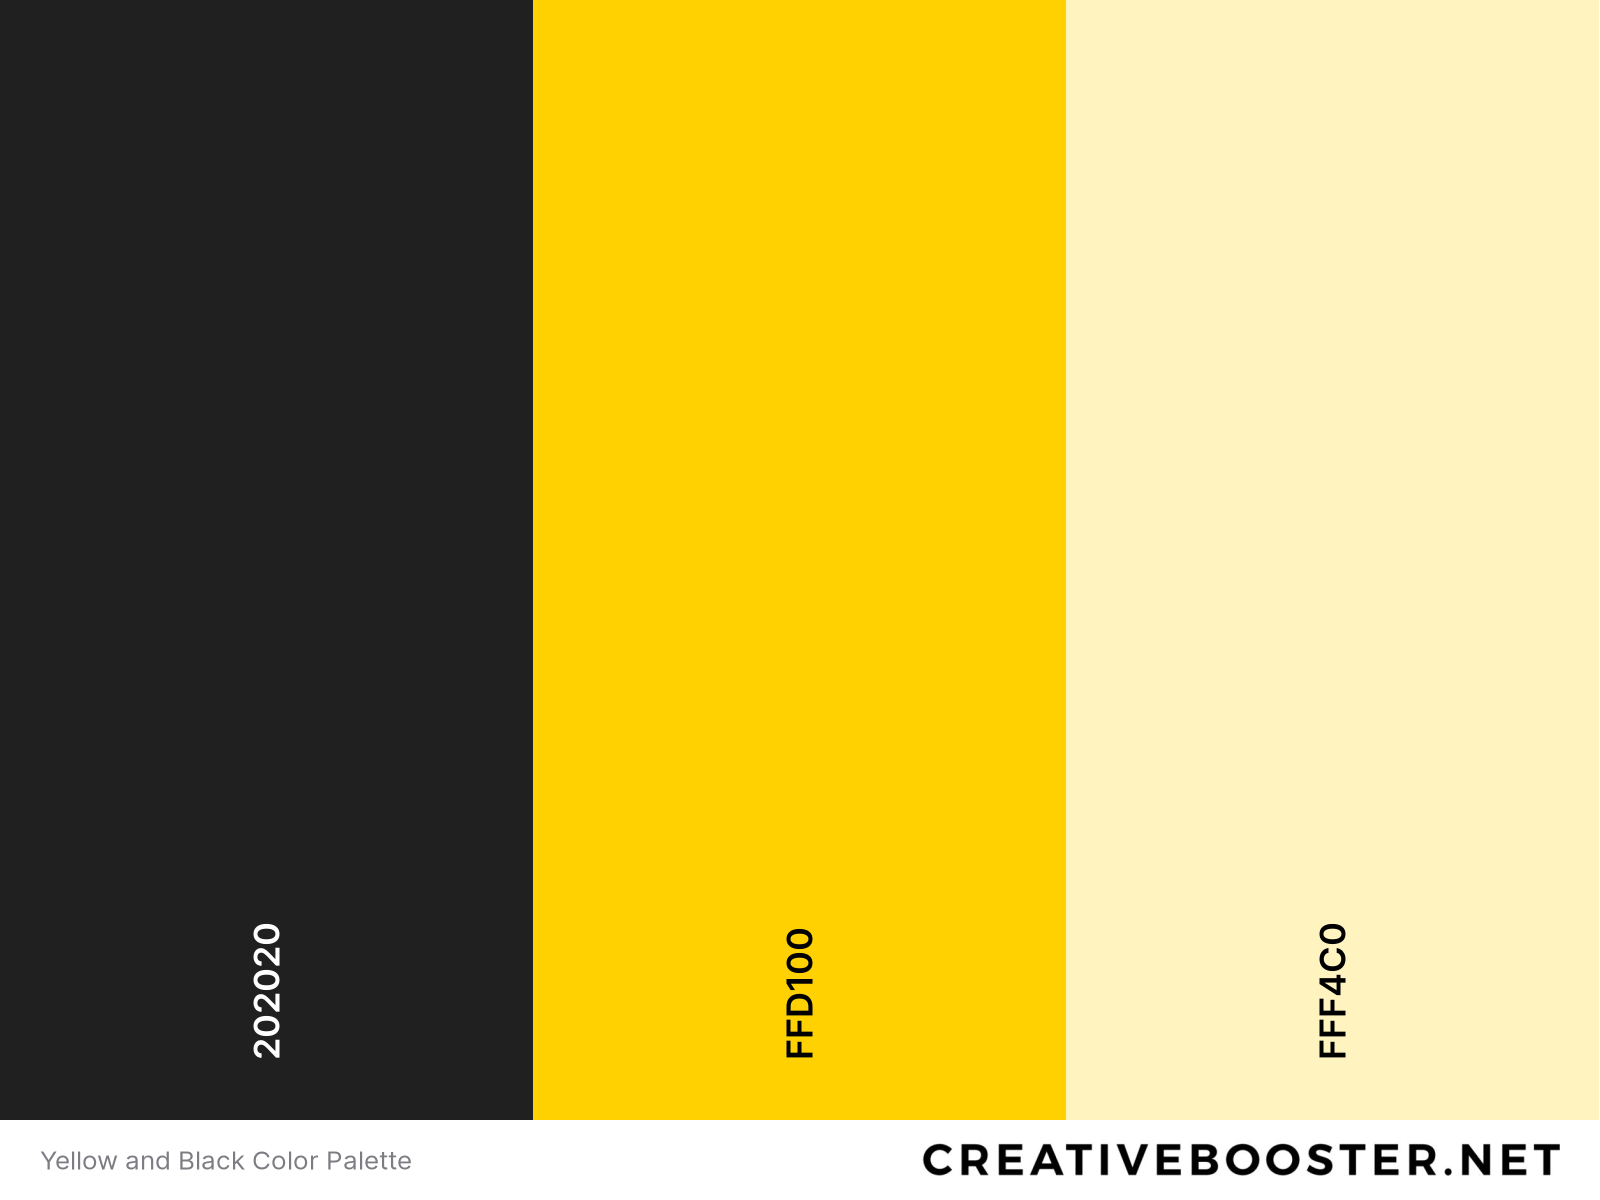 Yellow and Black Color Palette